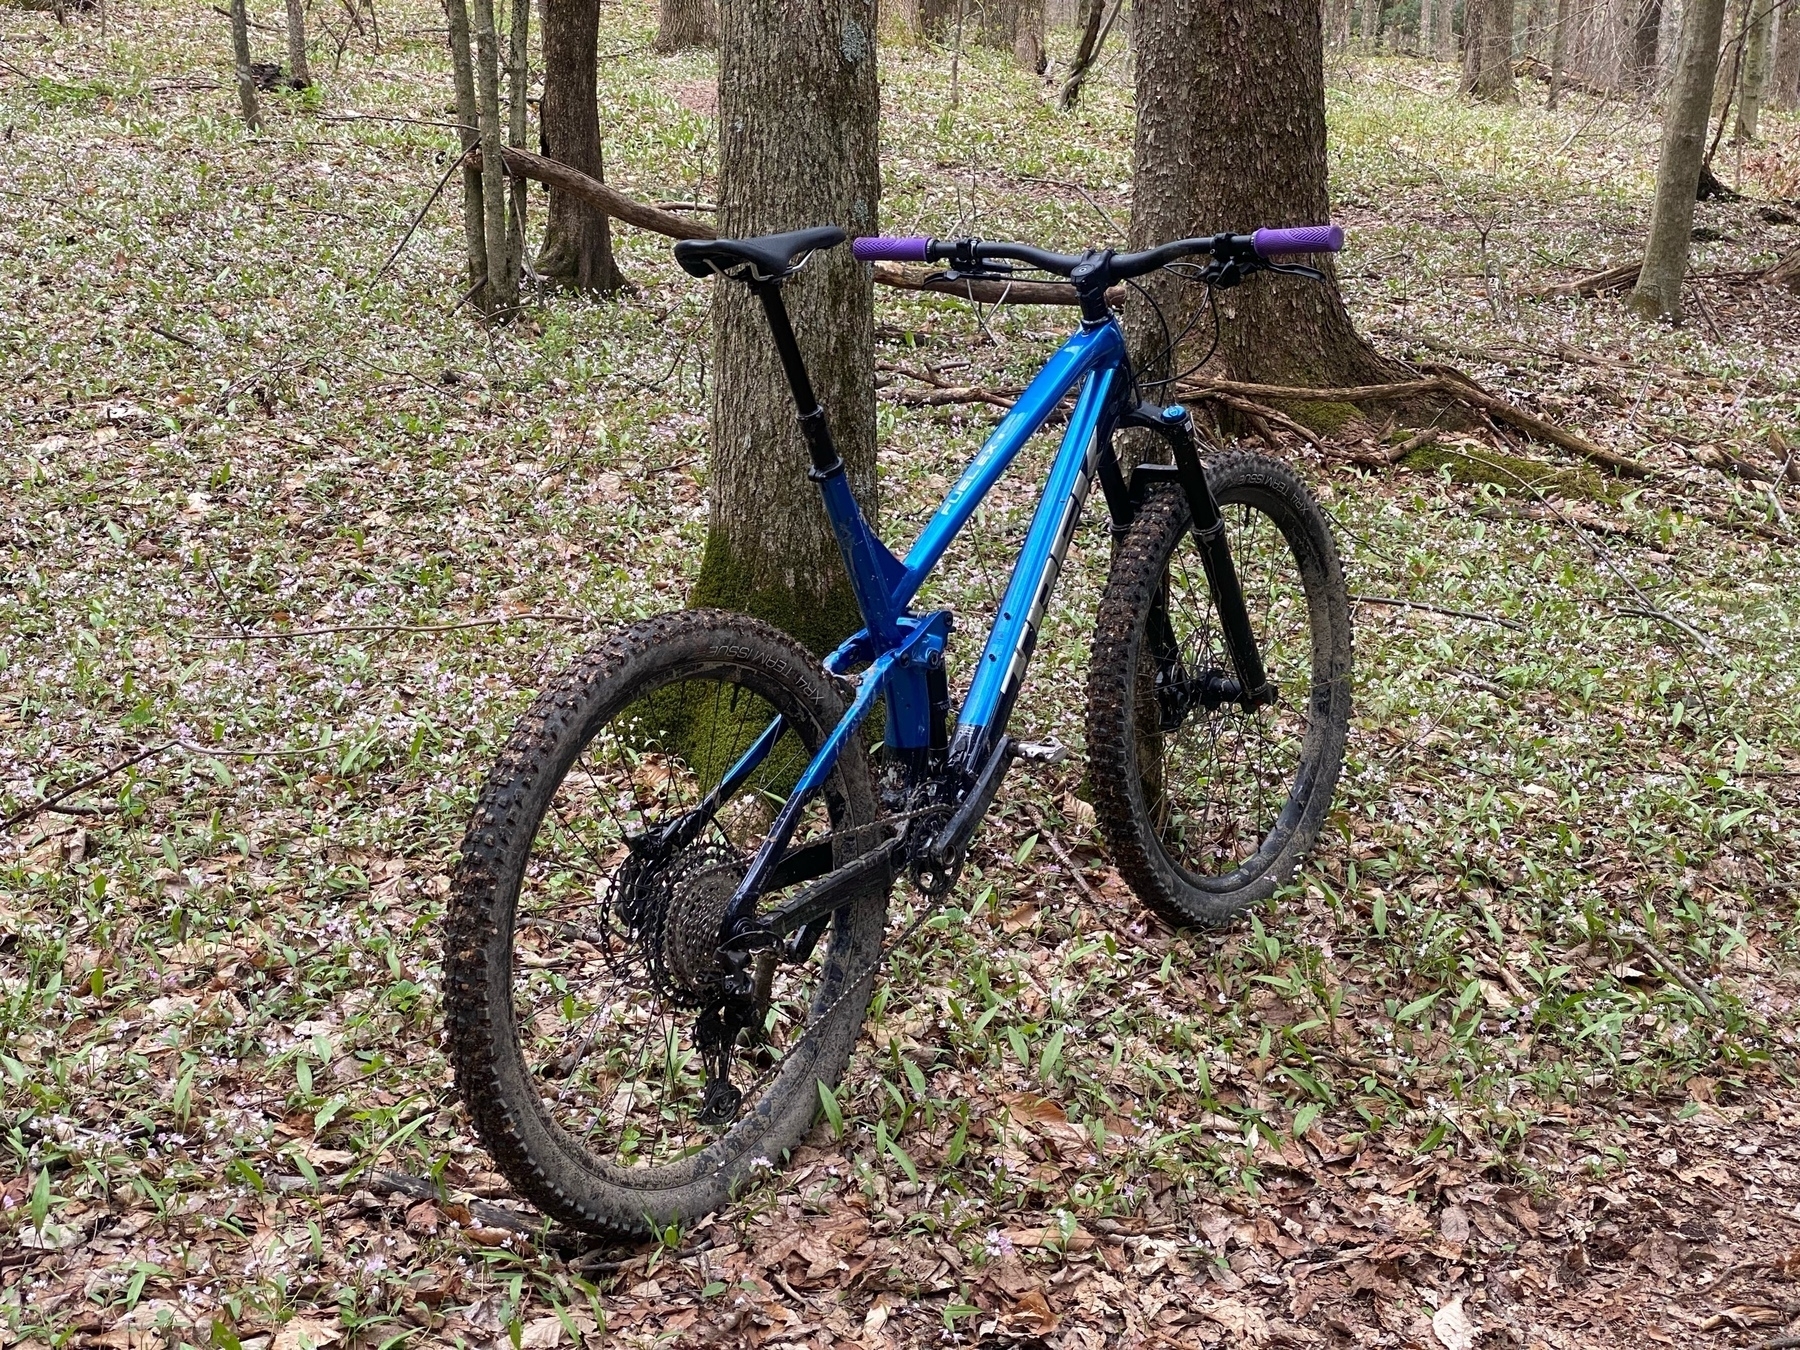 a blue Trek mountain bike in front of a tree in a section of hardwood forest.